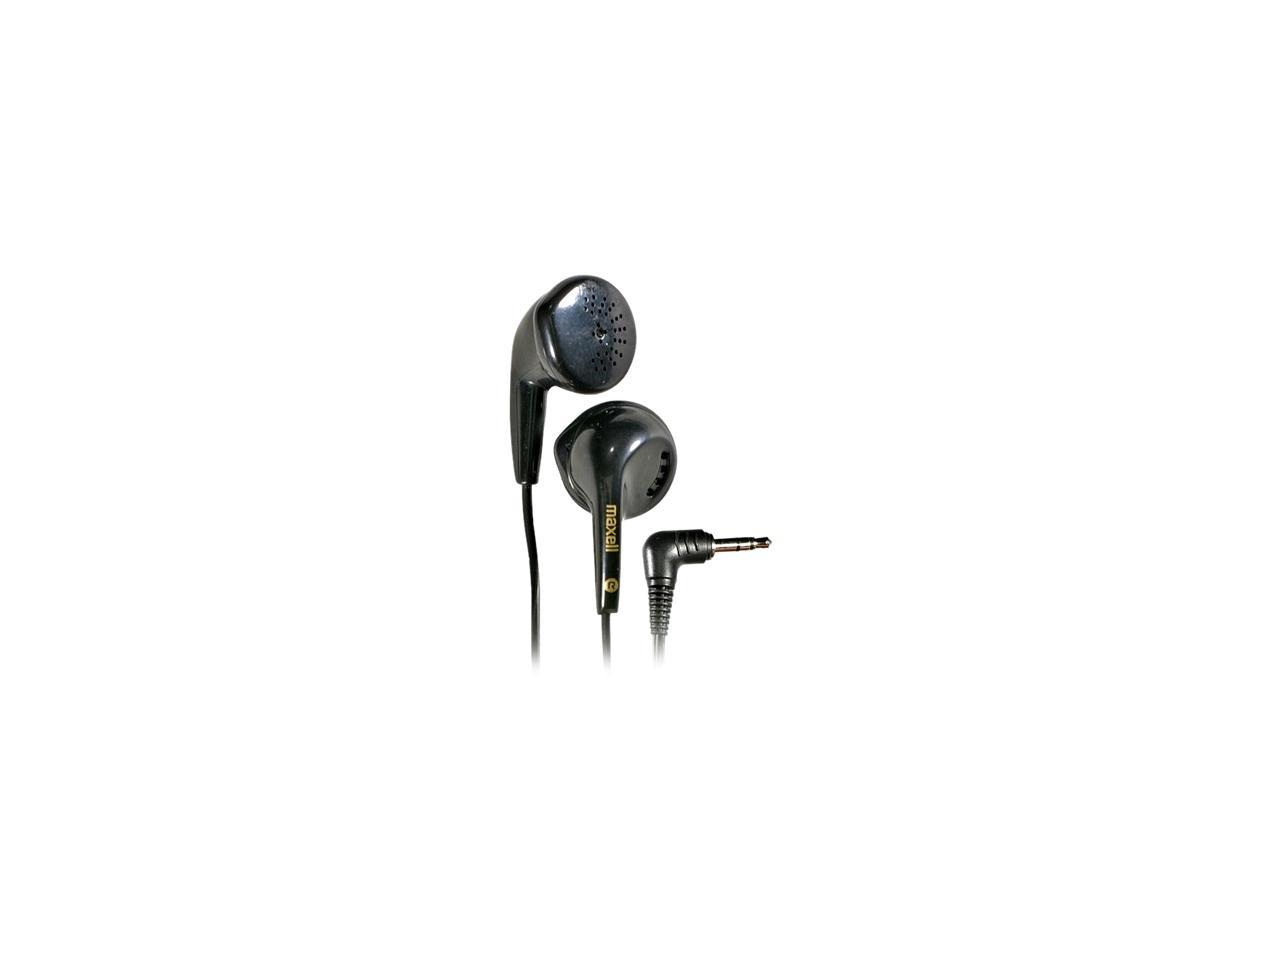 Maxell In-Ear Headphones, Black, MAX190560 - image 1 of 2